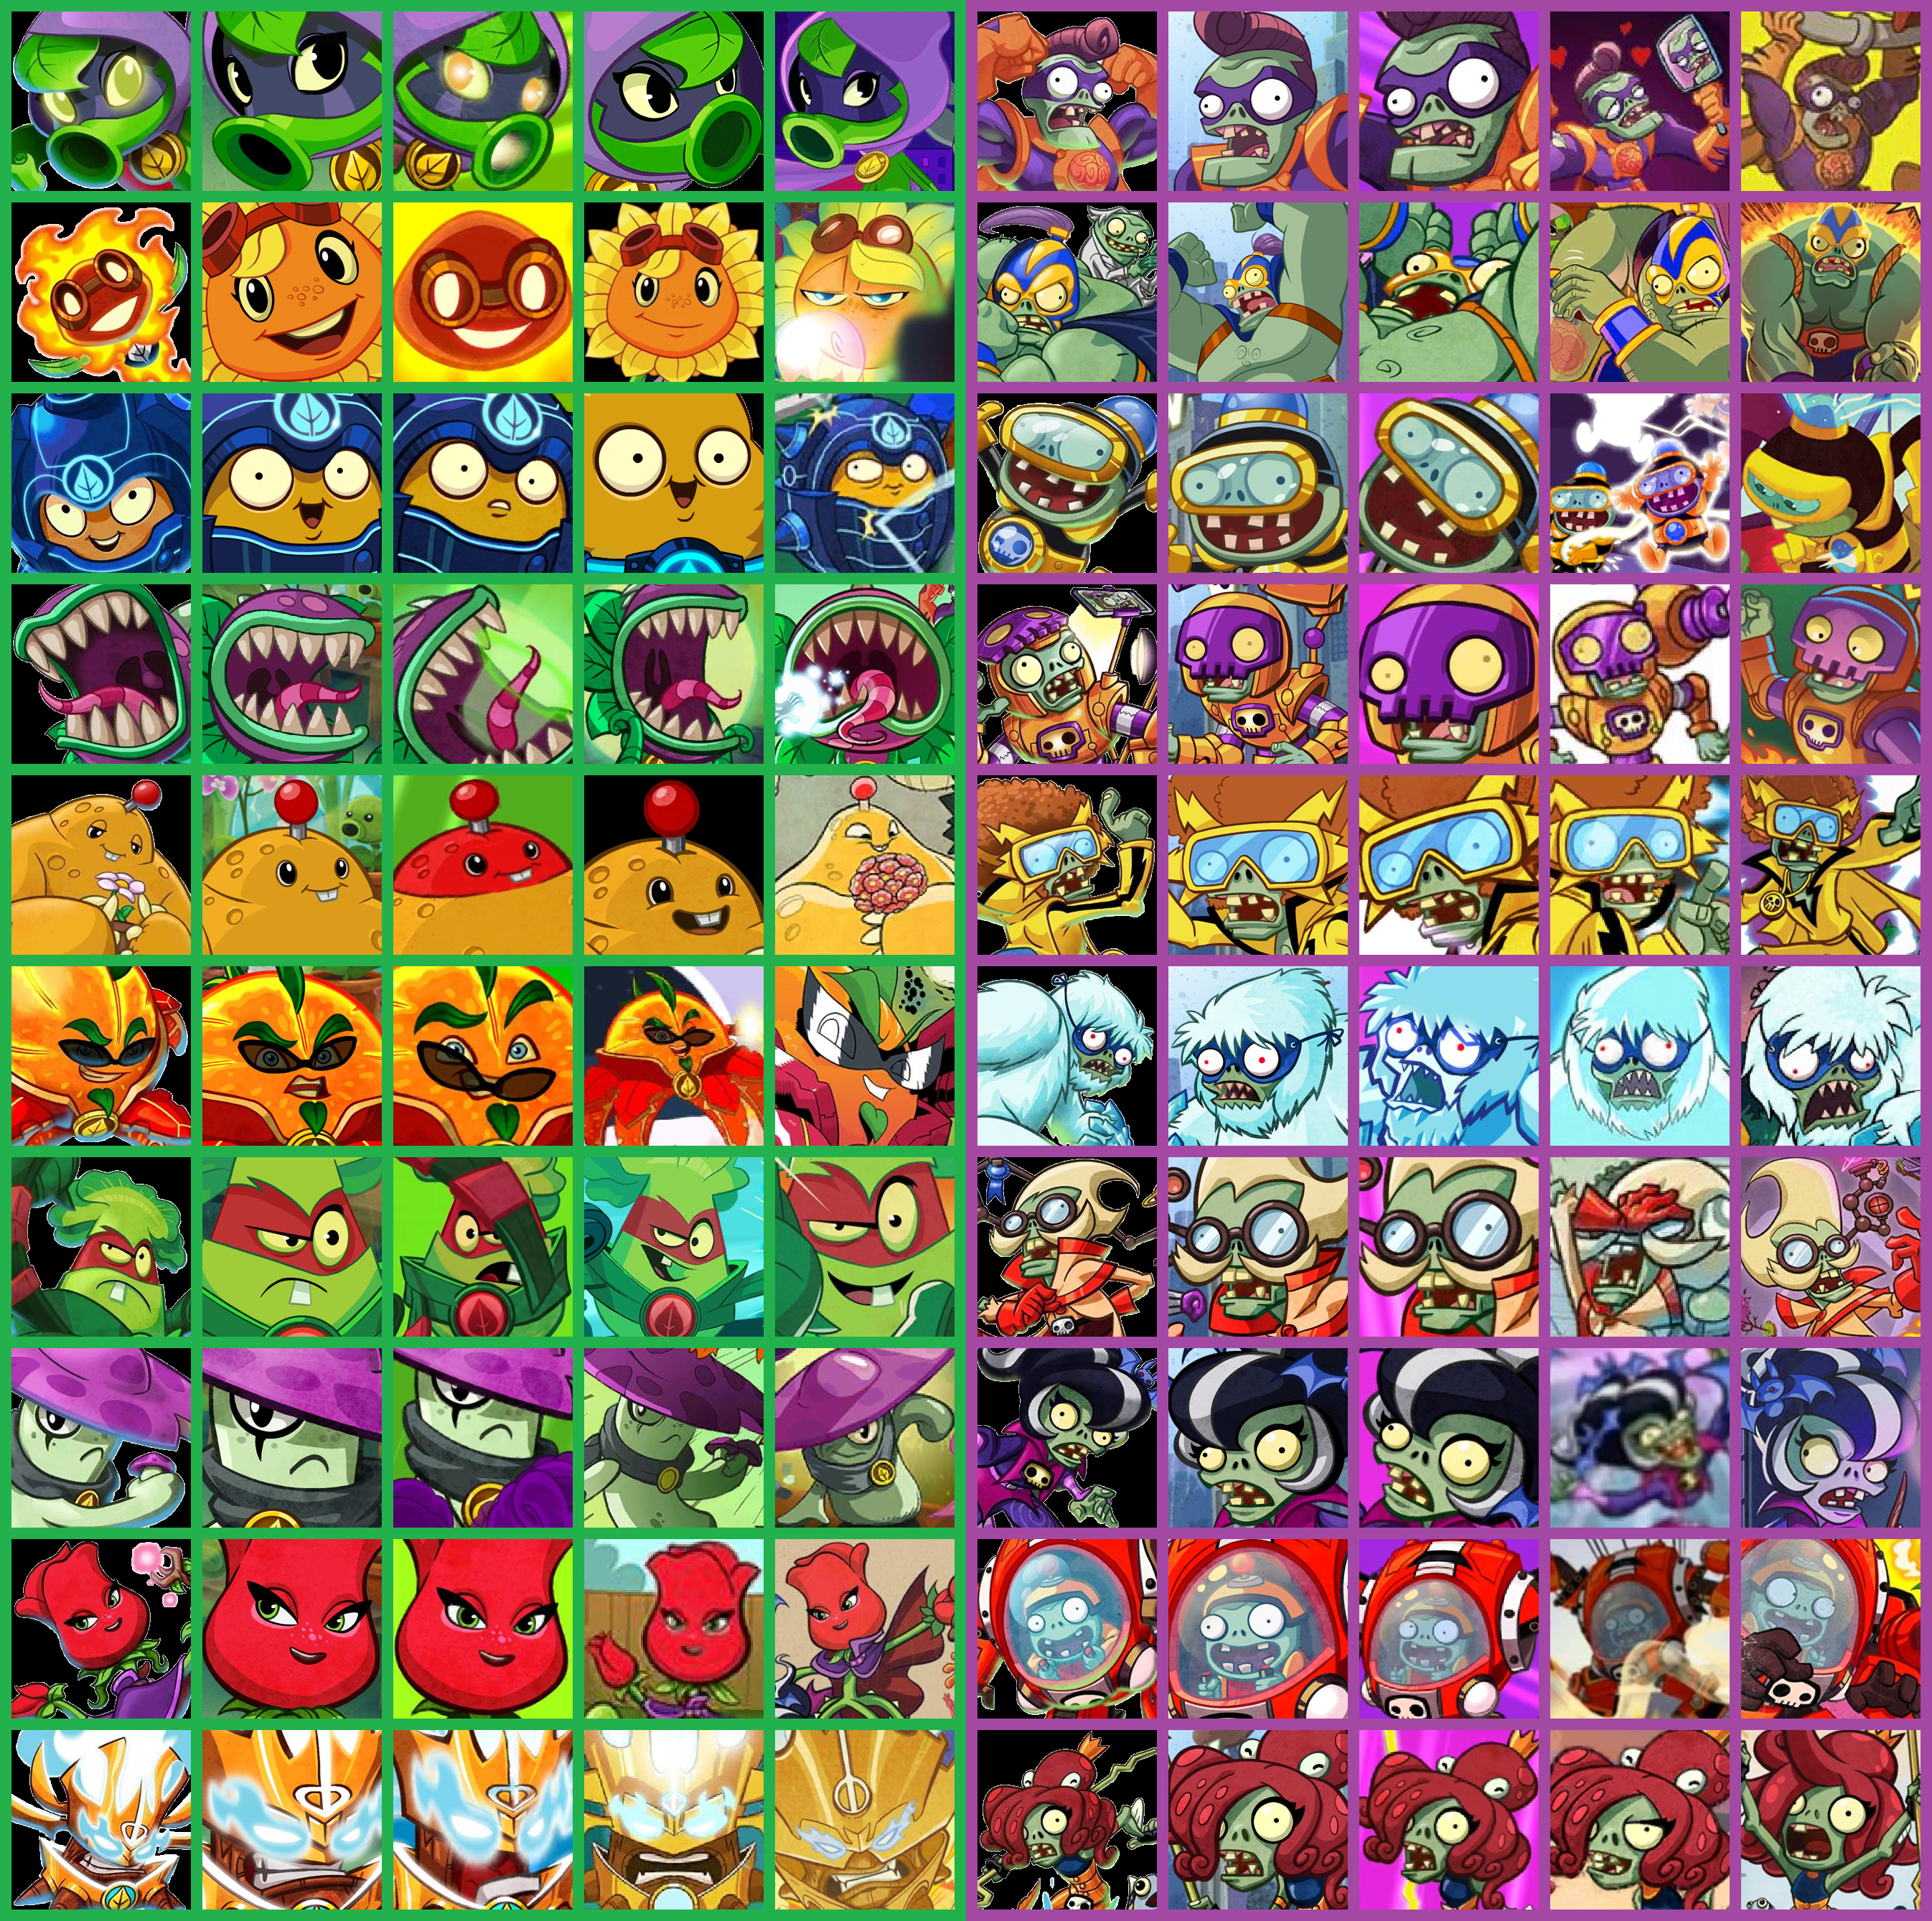 Plants vs Zombies Heroes Characters by JC1234TheToonist on DeviantArt